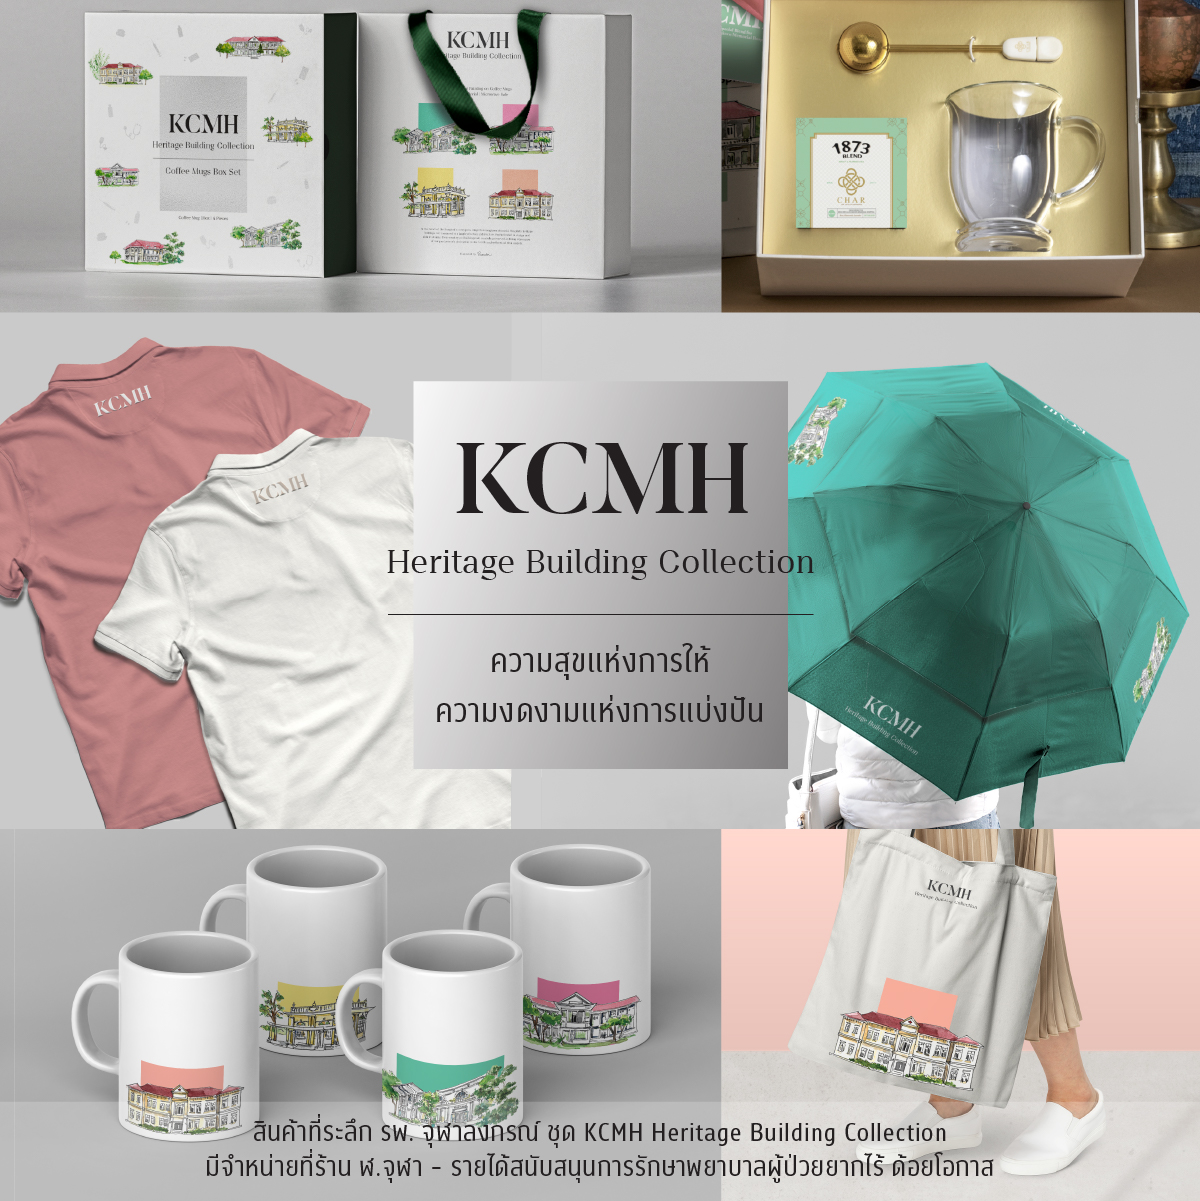 KCMH Heritage Building Collection